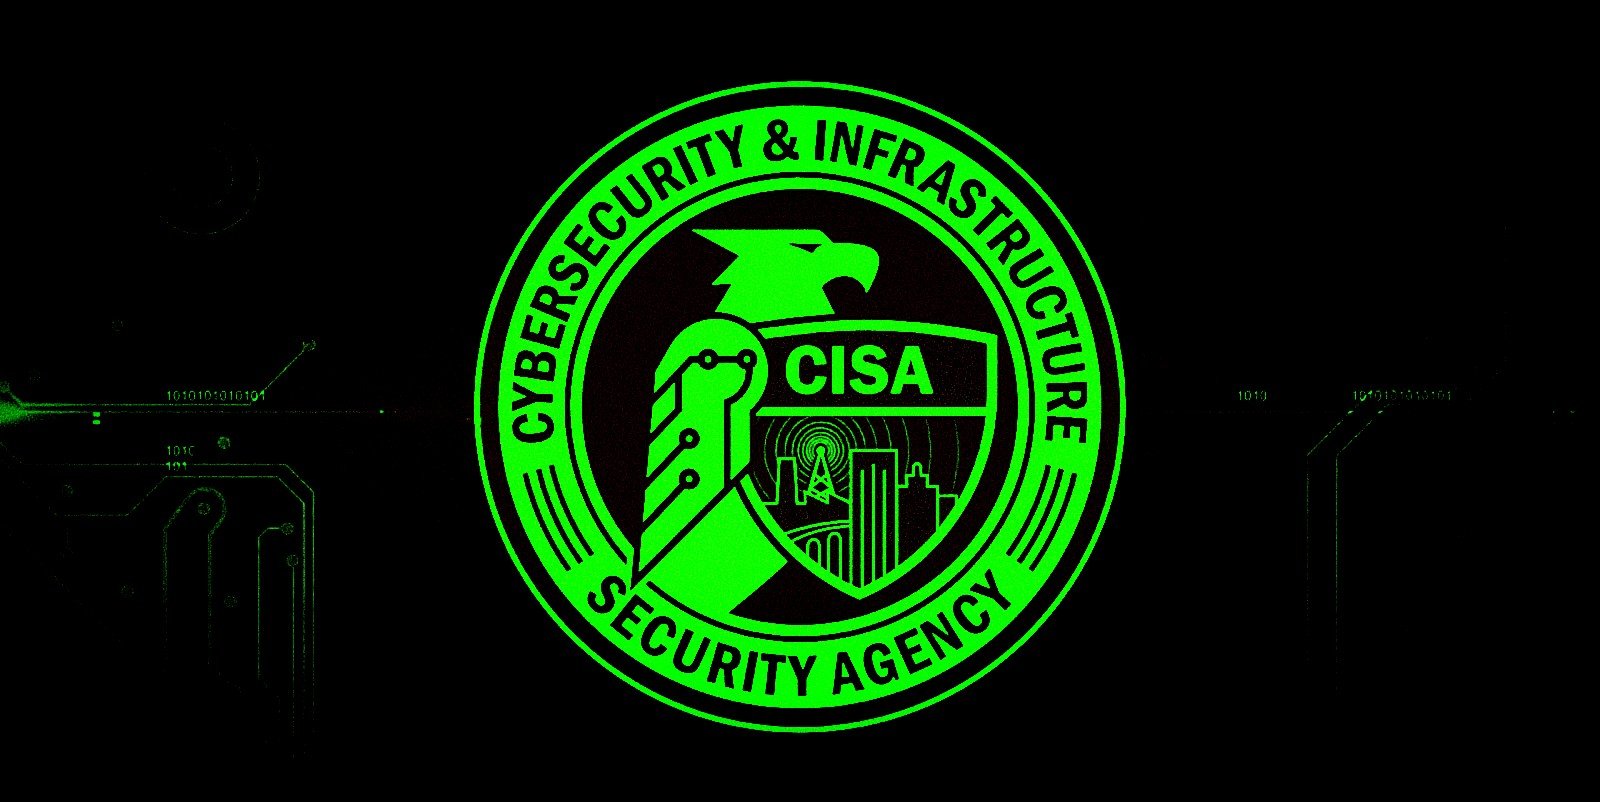 CISA urges orgs to patch actively exploited Windows SeriousSAM bug